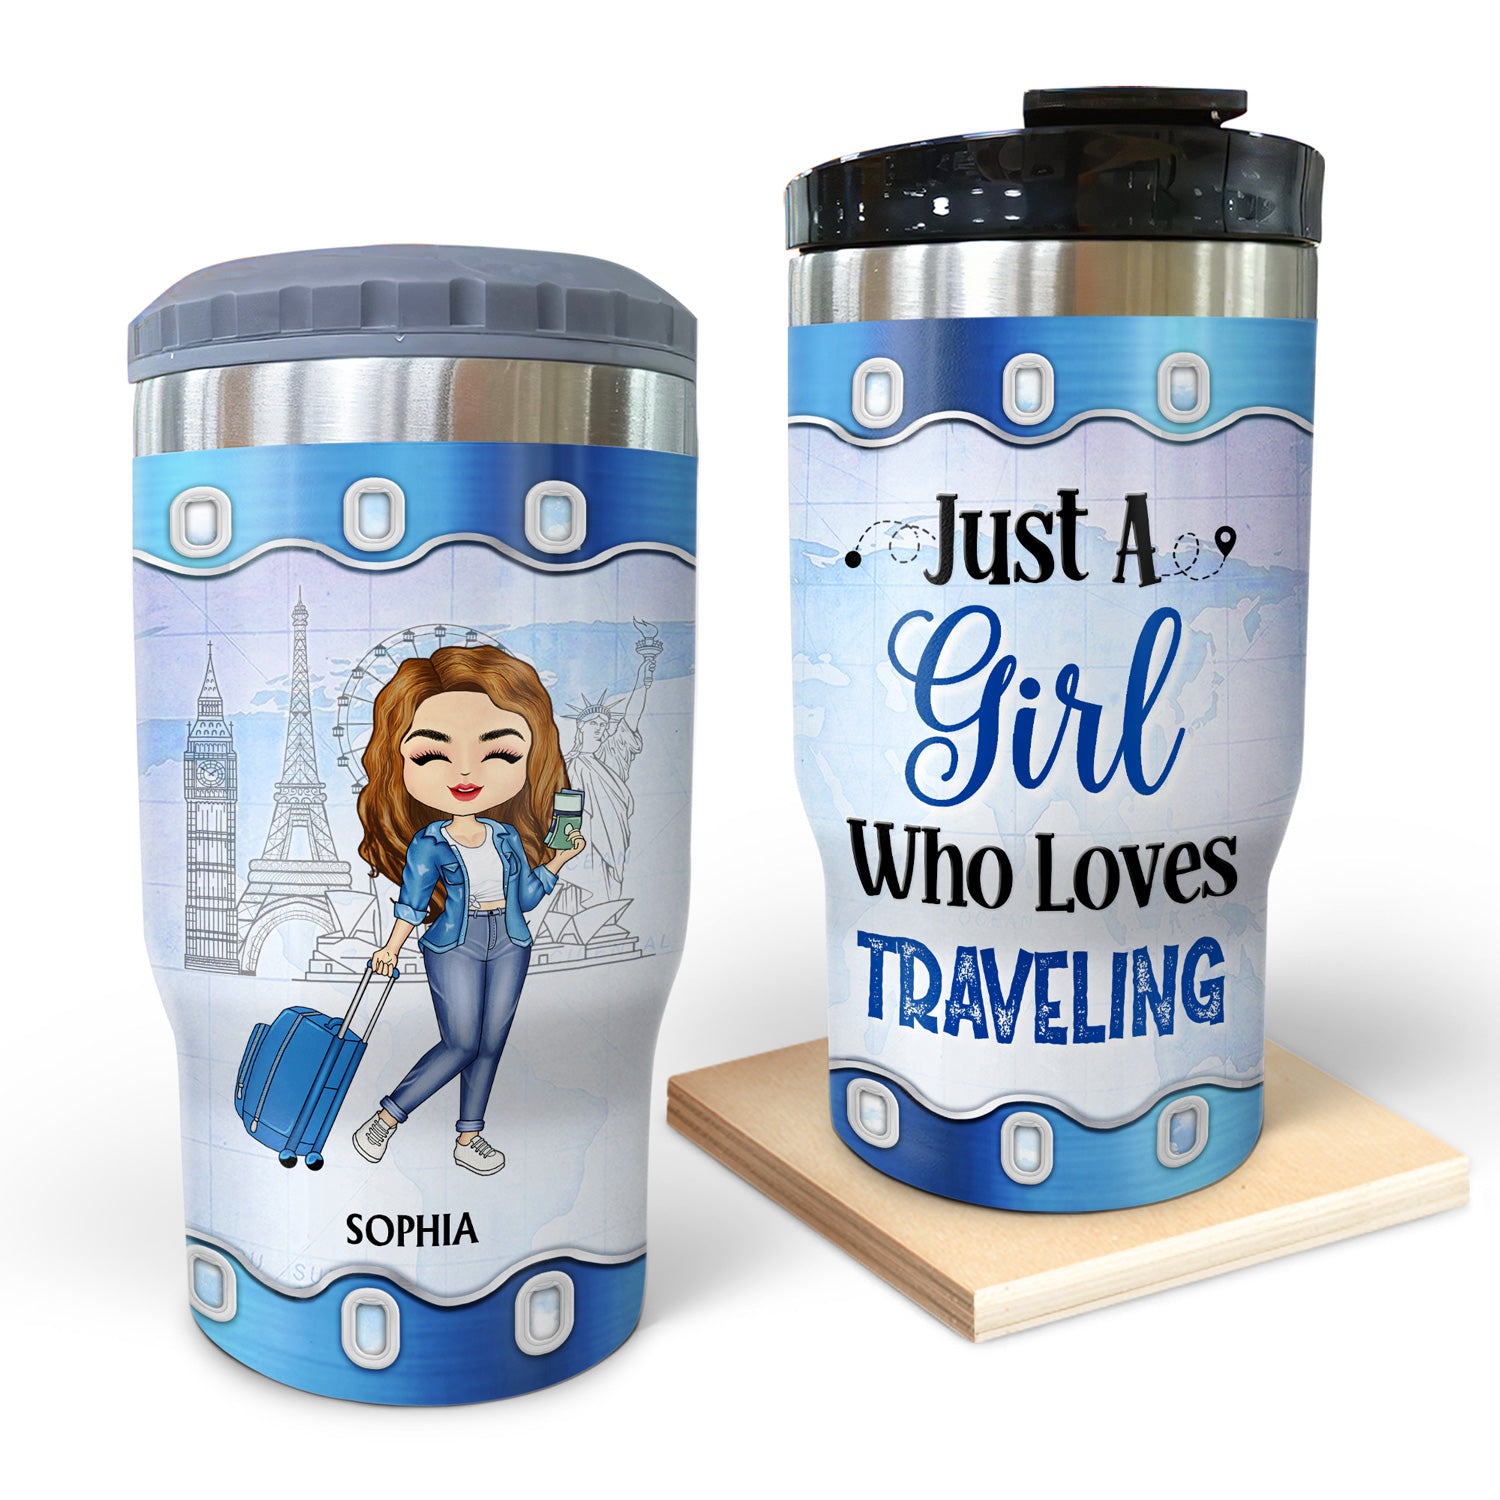 Just A Girl Boy Who Loves Traveling Cruising - Birthday Gift For Him, Her, Kid, Friends, Family, Trippin', Vacation Lovers - Personalized Custom Triple 3 In 1 Can Cooler